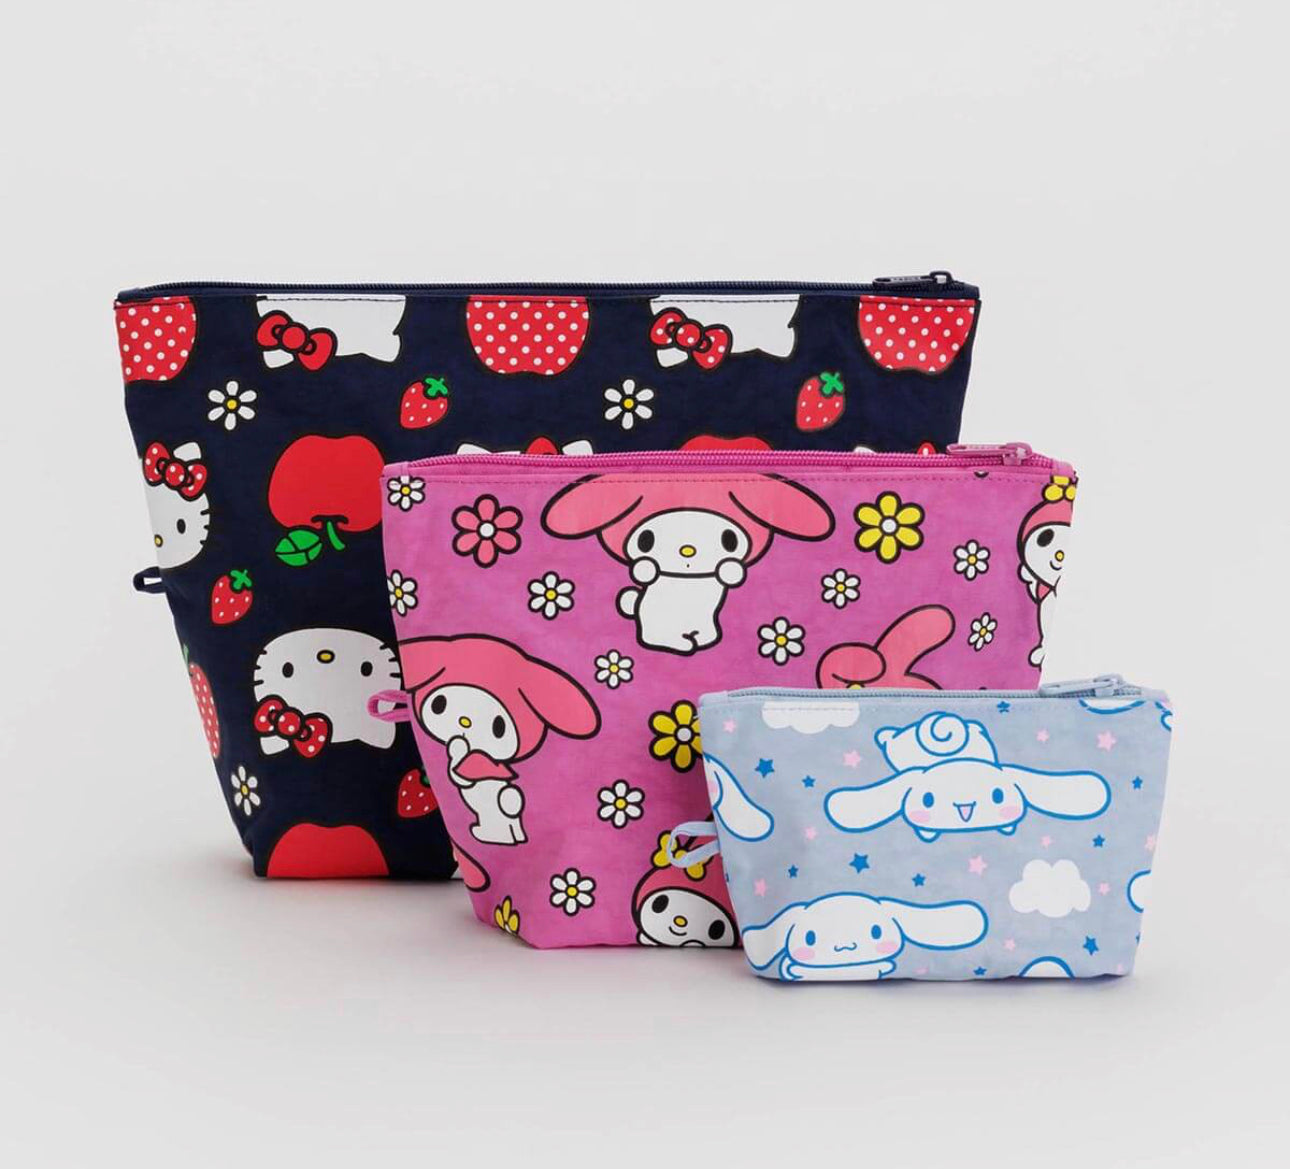 BAGGU Go Pouch Set in Hello Kitty and Friends by Baggu